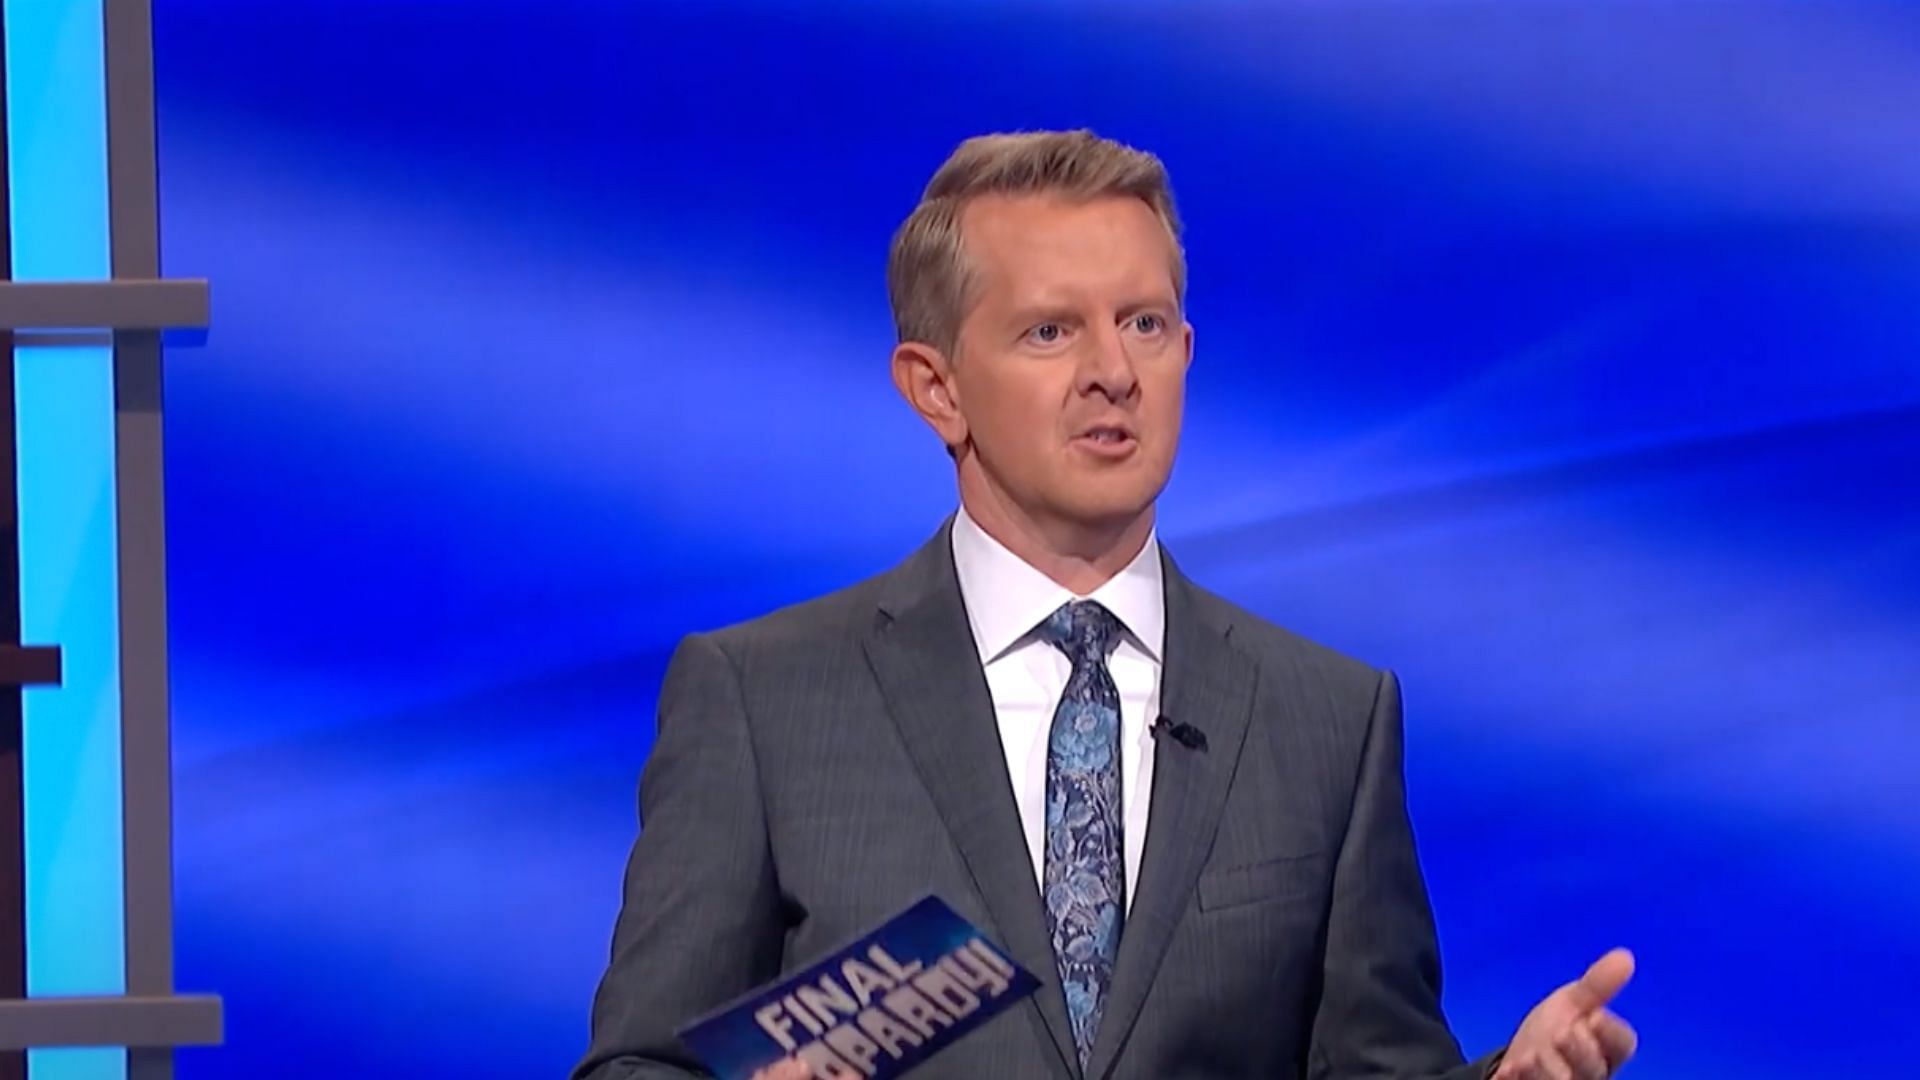 The latest episode was hosted by Ken Jennings